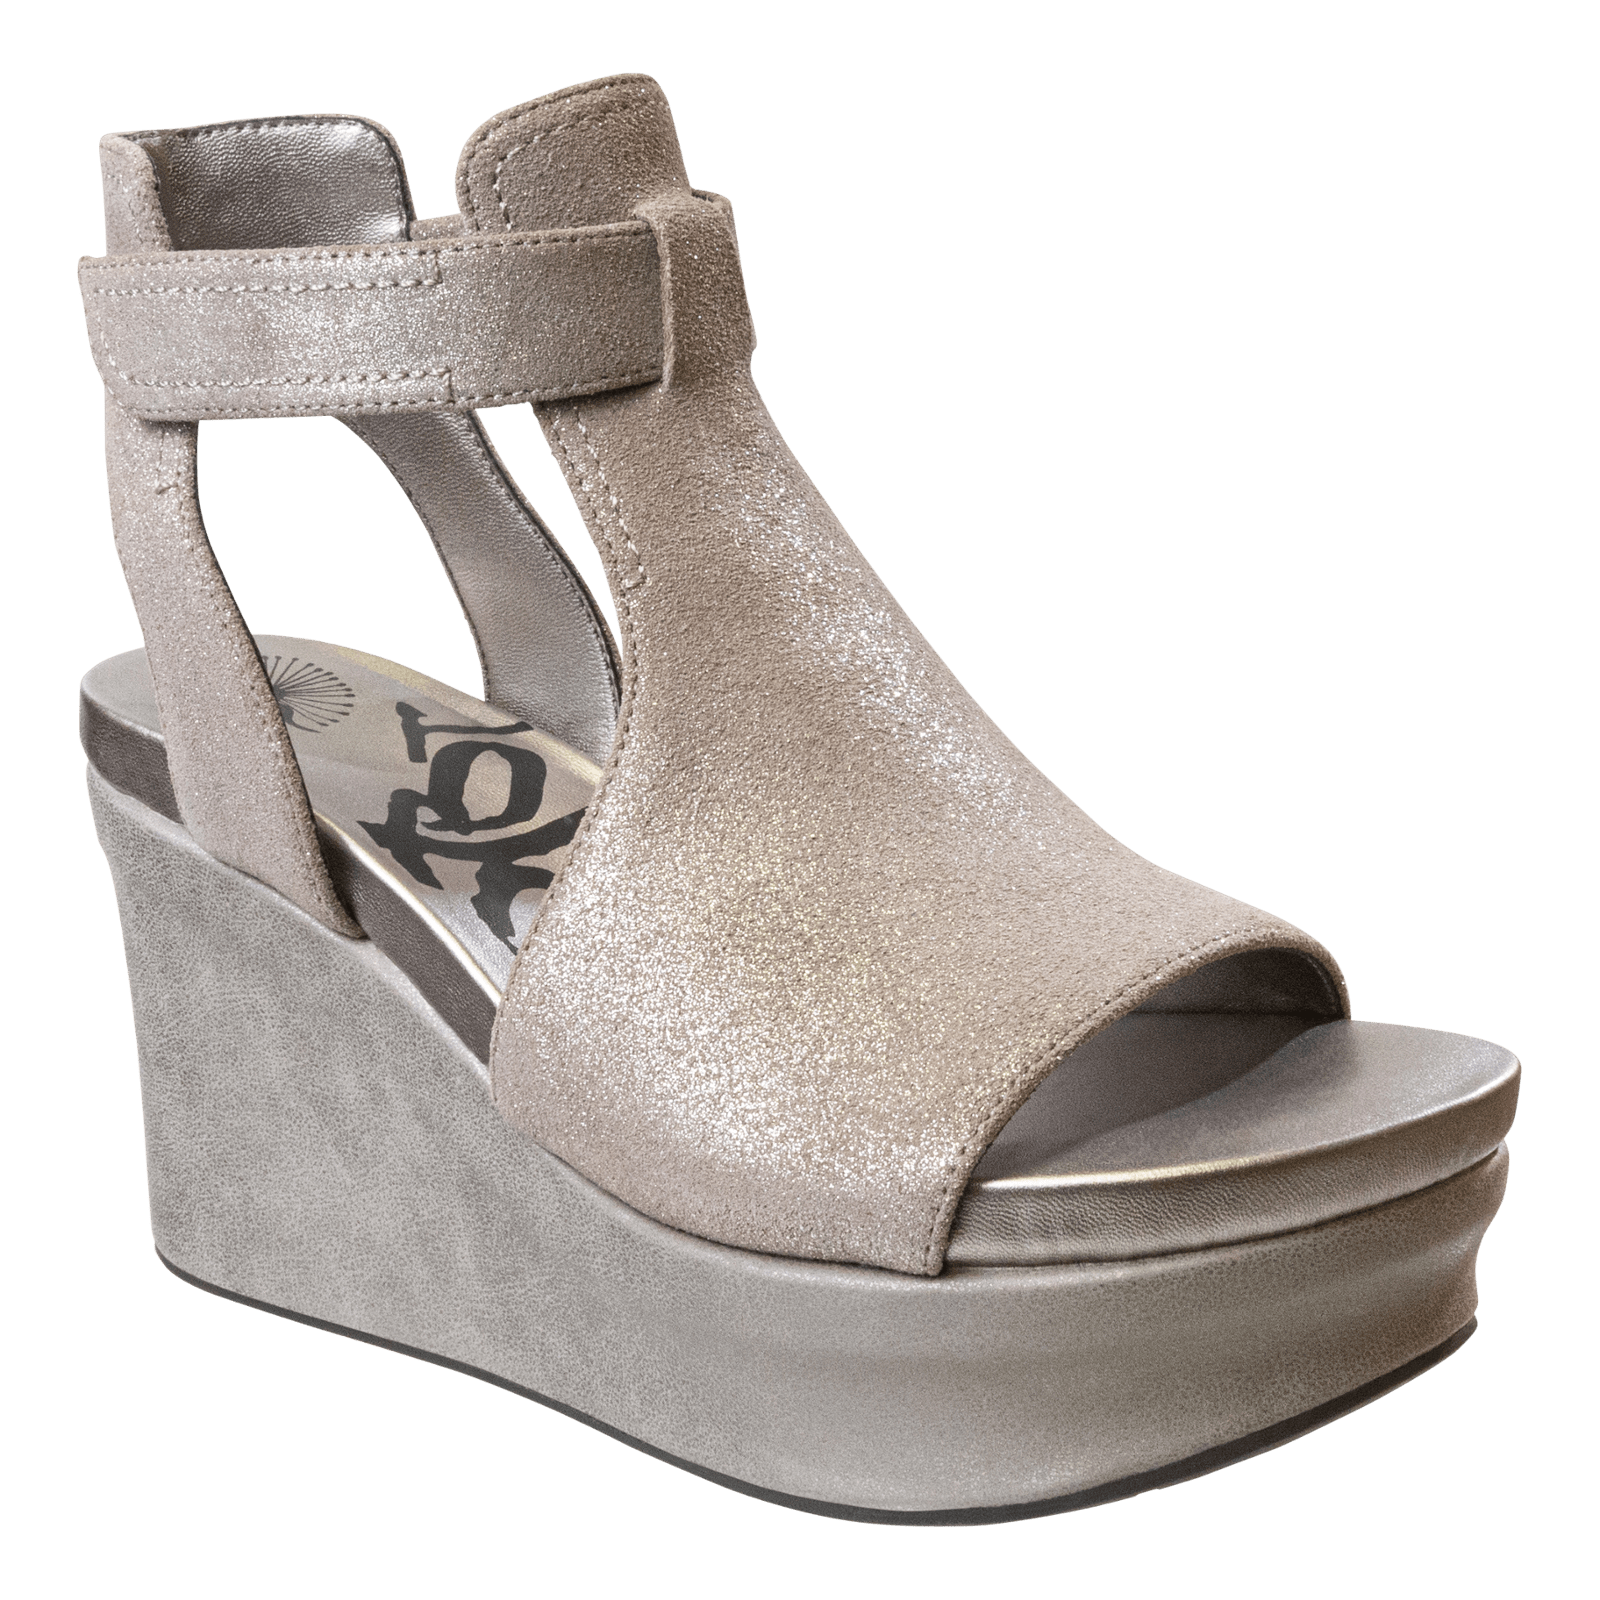 MOJO in SILVER Wedge Sandals - OTBT shoes